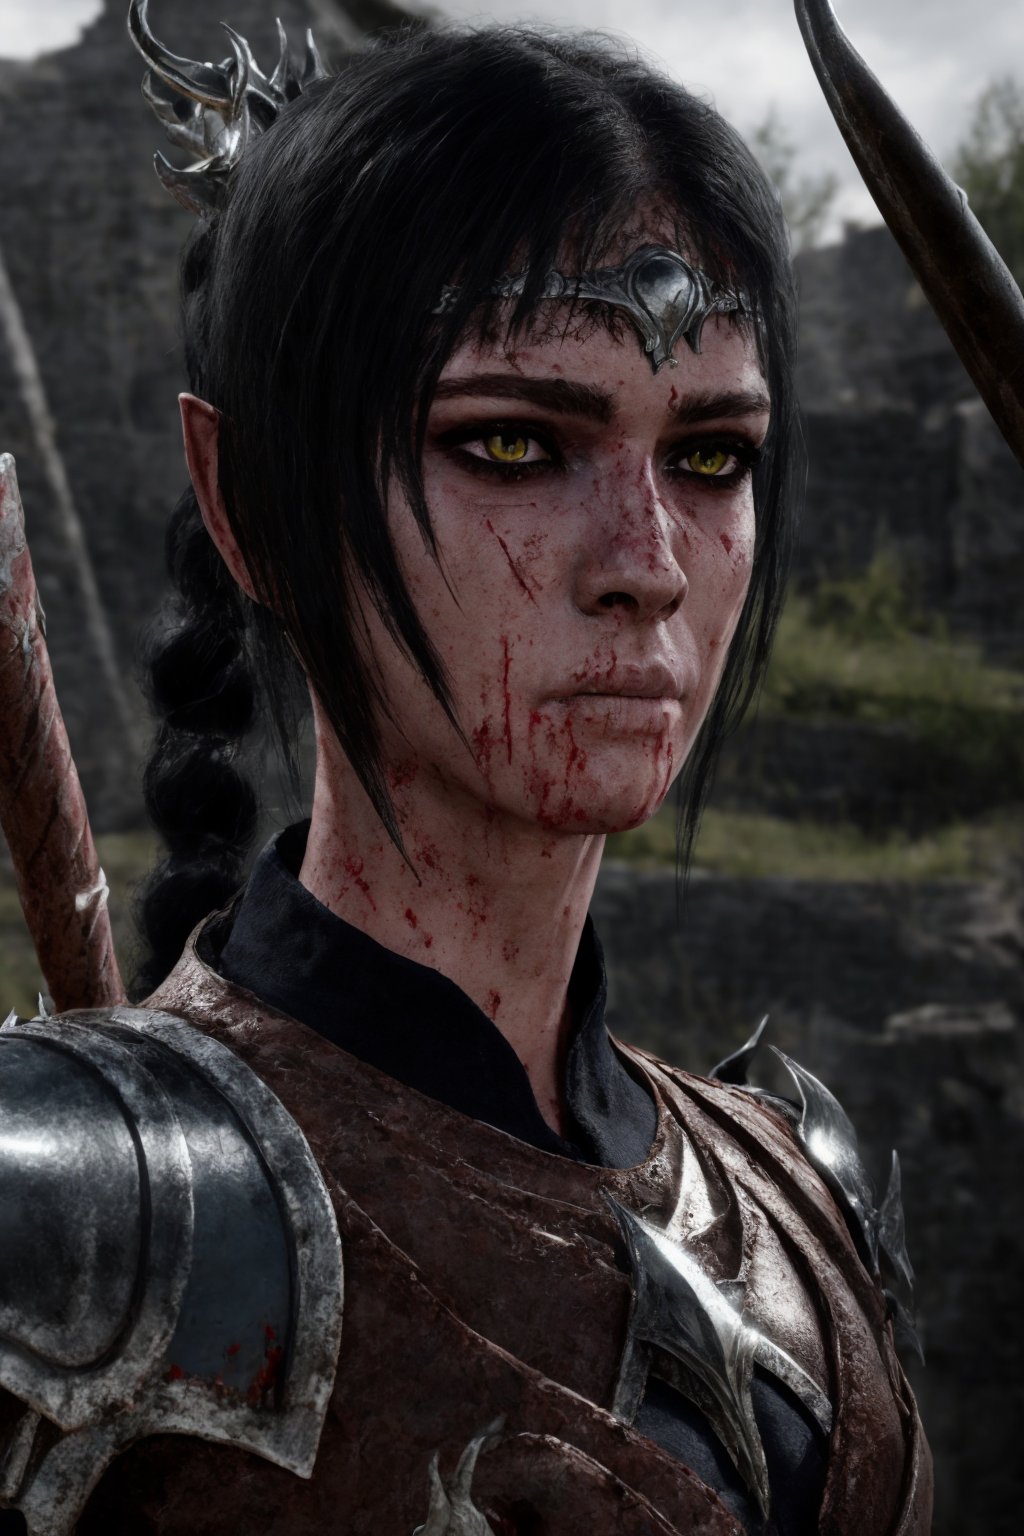 ((shad0wheart)), sh-arm0r, photograph of 1girl, long black hair, bloody face, pale green eyes, scar, armor, fantasy setting, facing toward viewer, portrait, standing in village, UHD, best quality, masterpiece, photorealistic, detailed skin, realistic skin